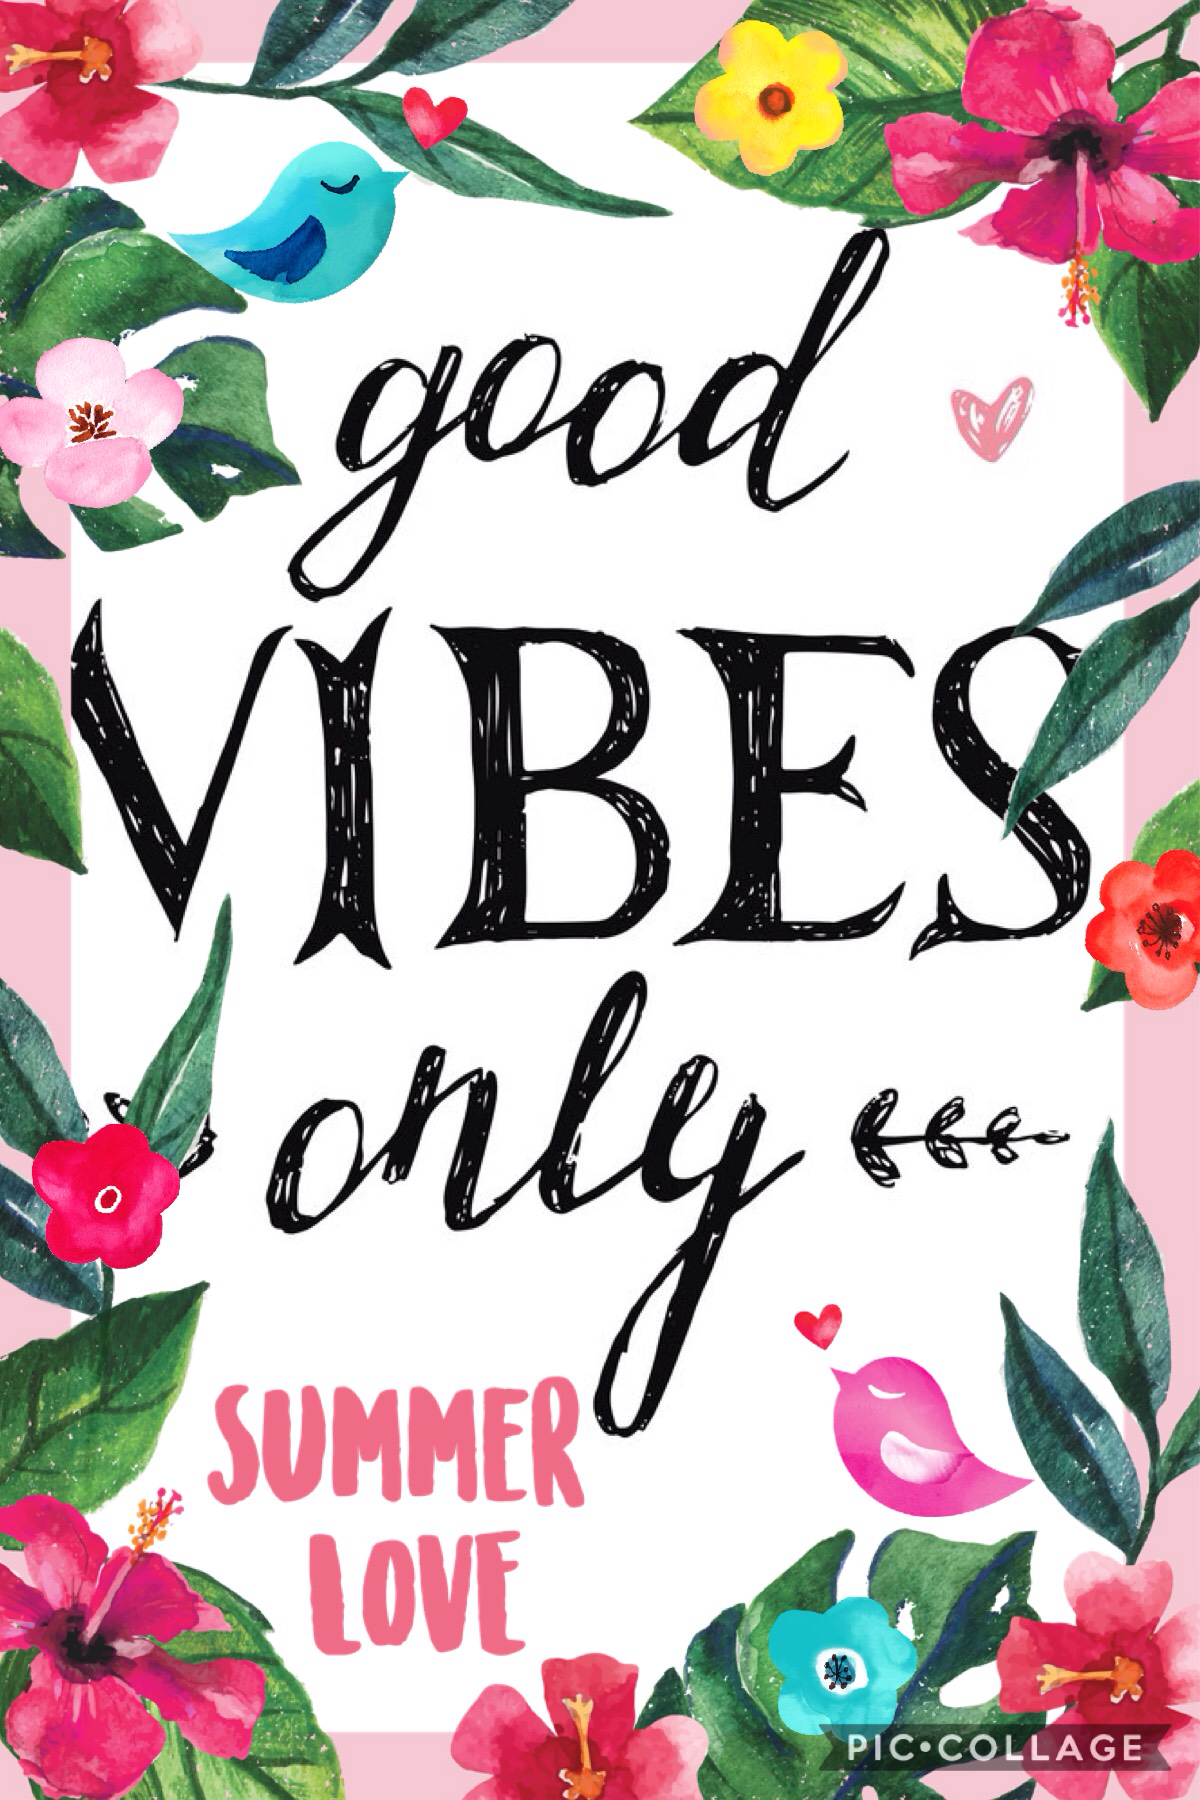 Being positive and keeping the good vibes, only is a happy way to spend the summer! 😉❤️